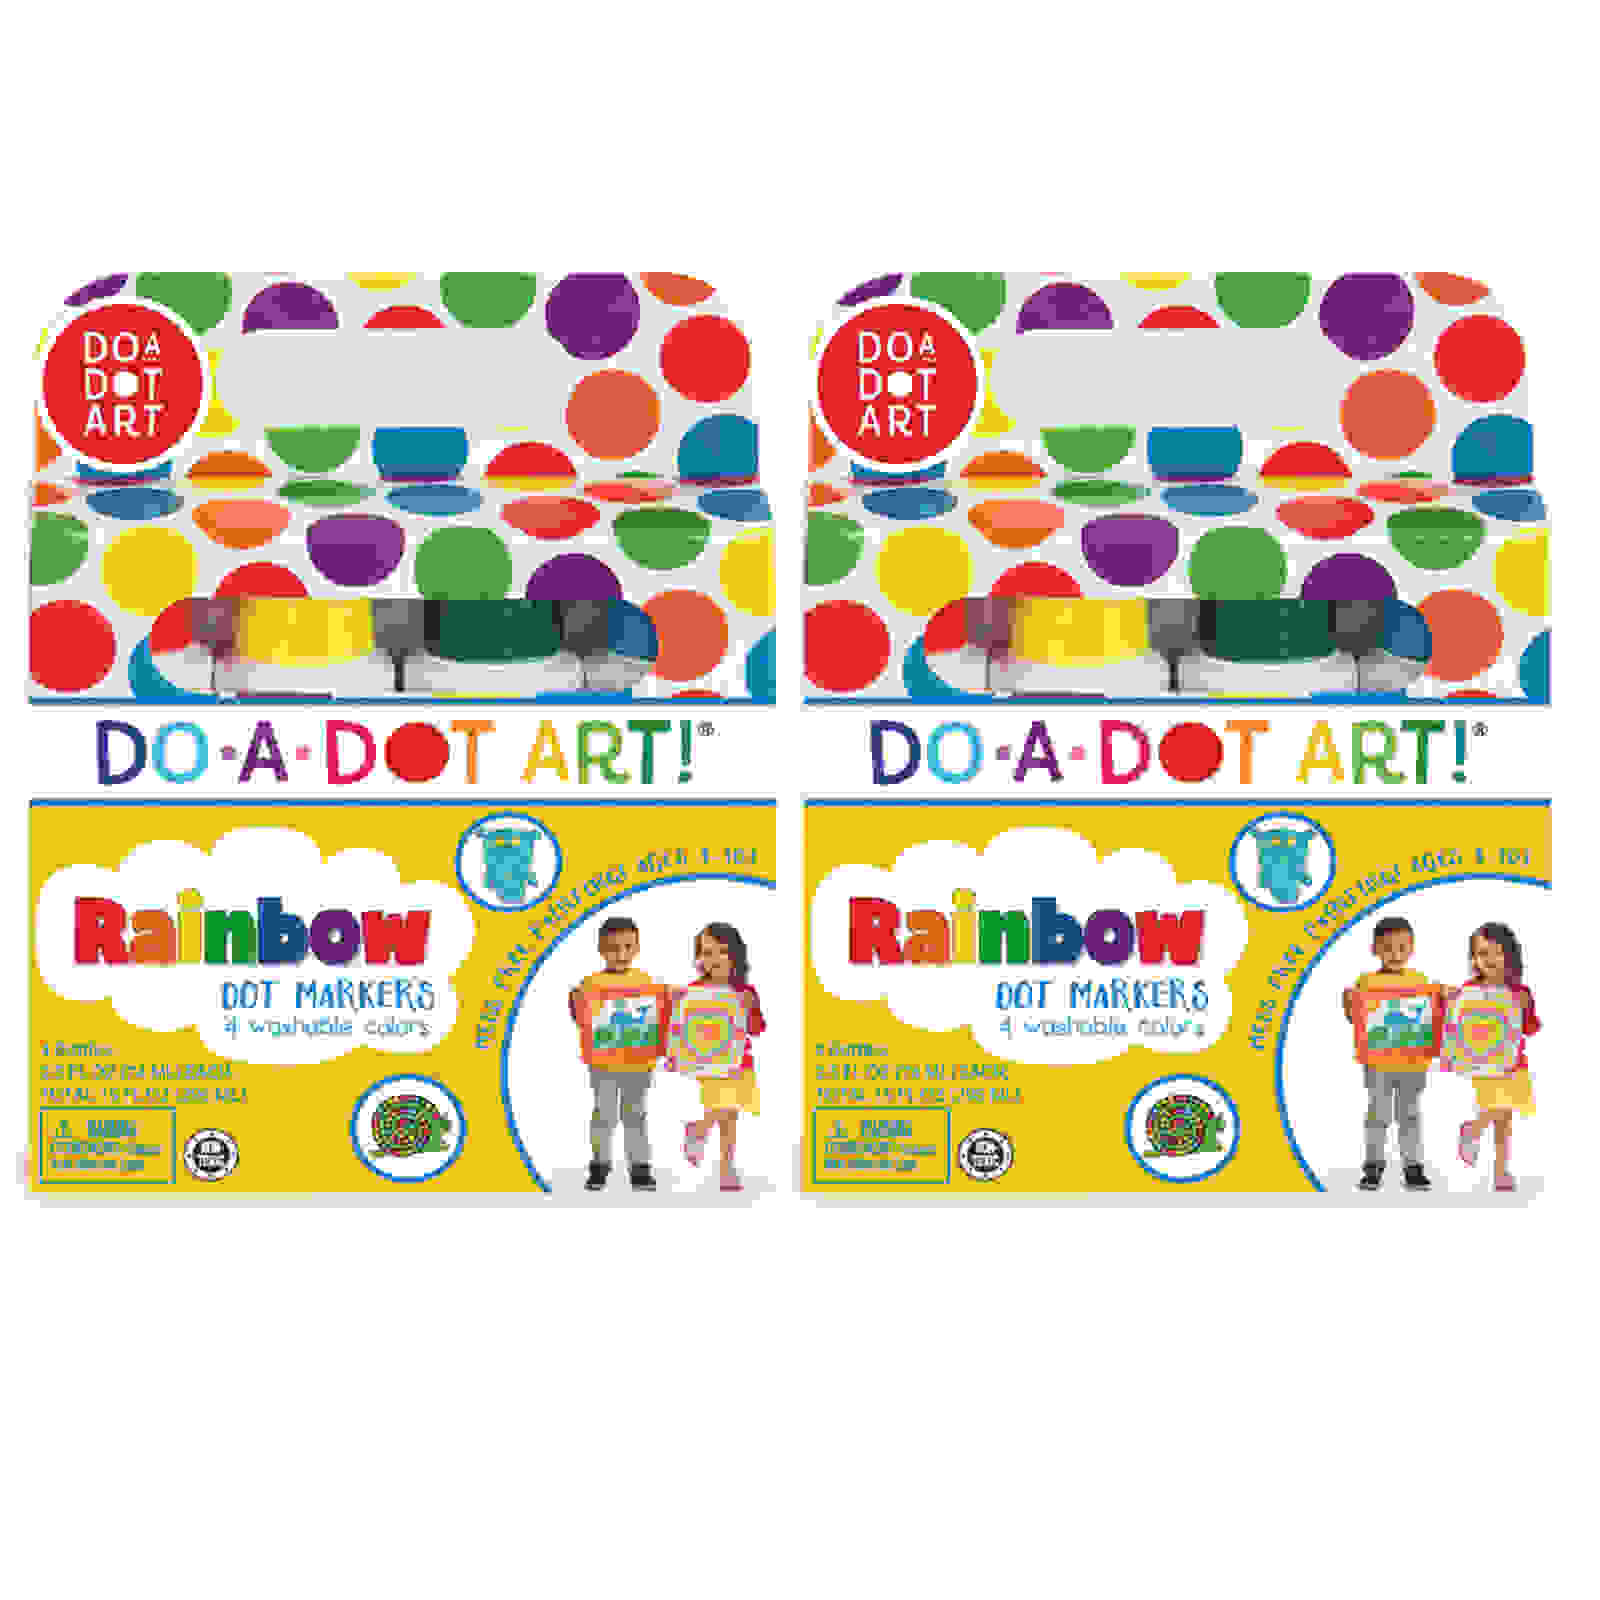 Washable Rainbow Dot Markers, 4 Per Pack, 2 Packs